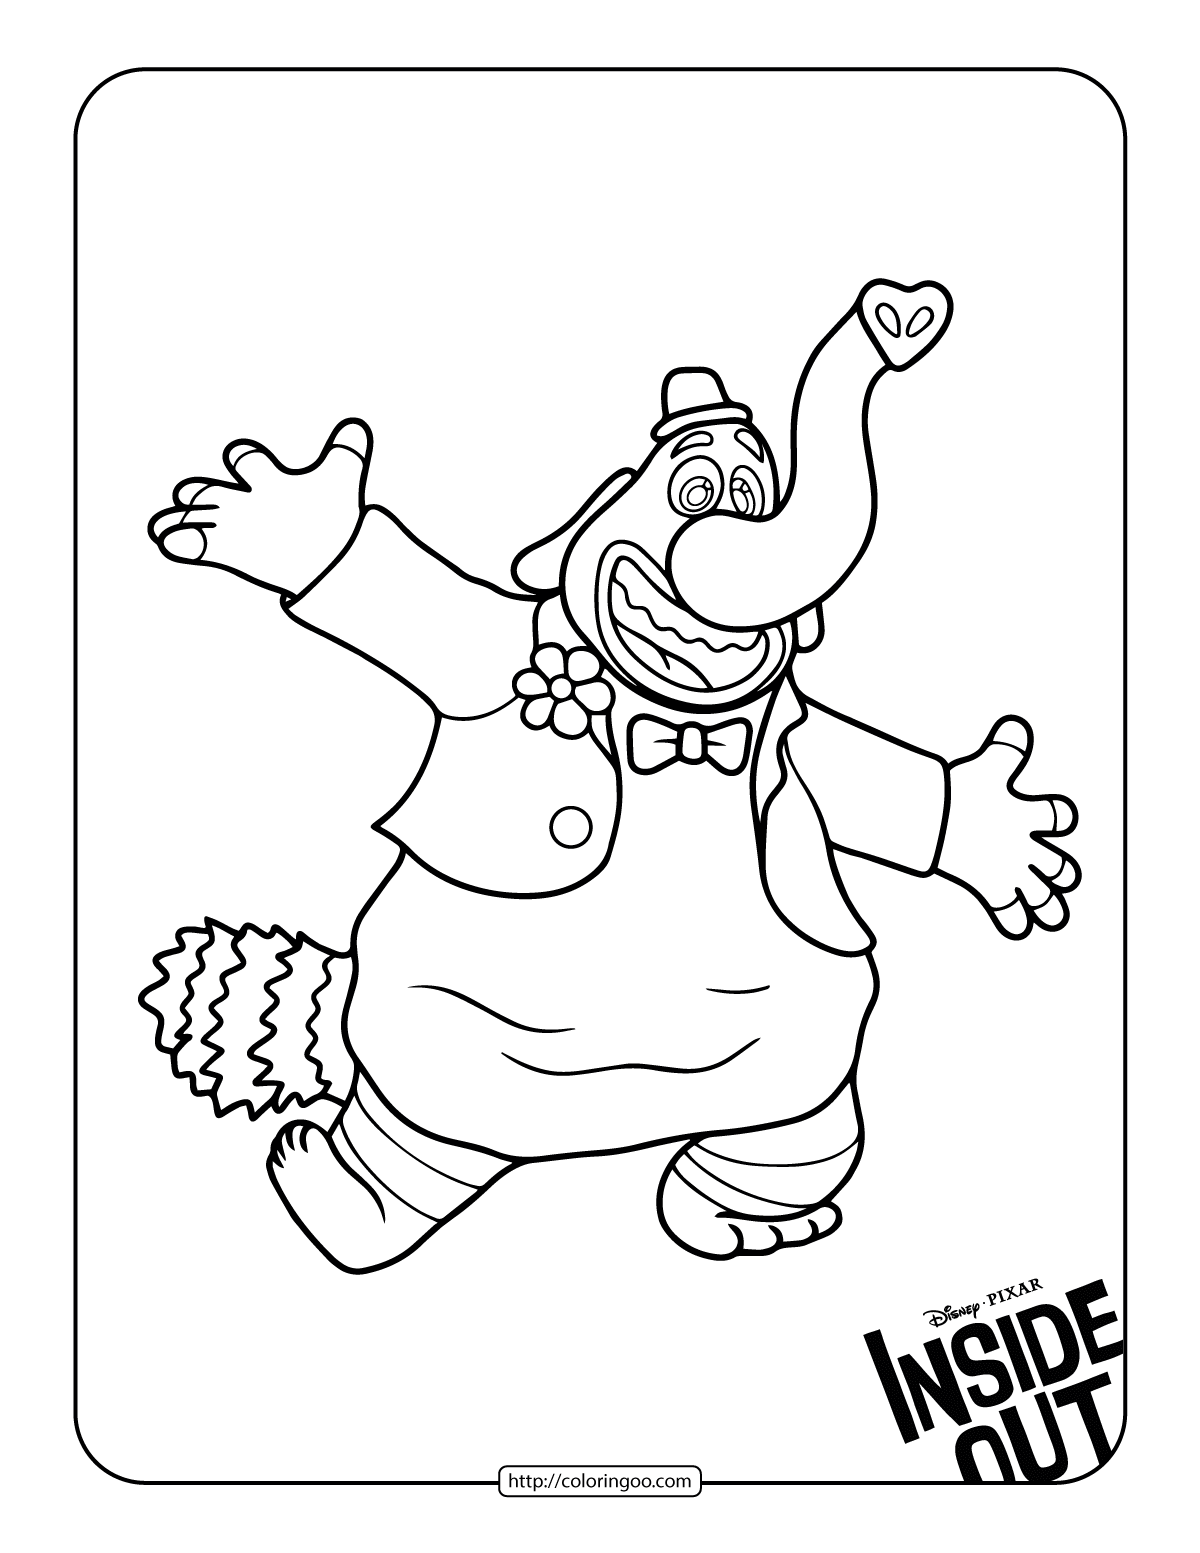 bing bong from inside out coloring sheet